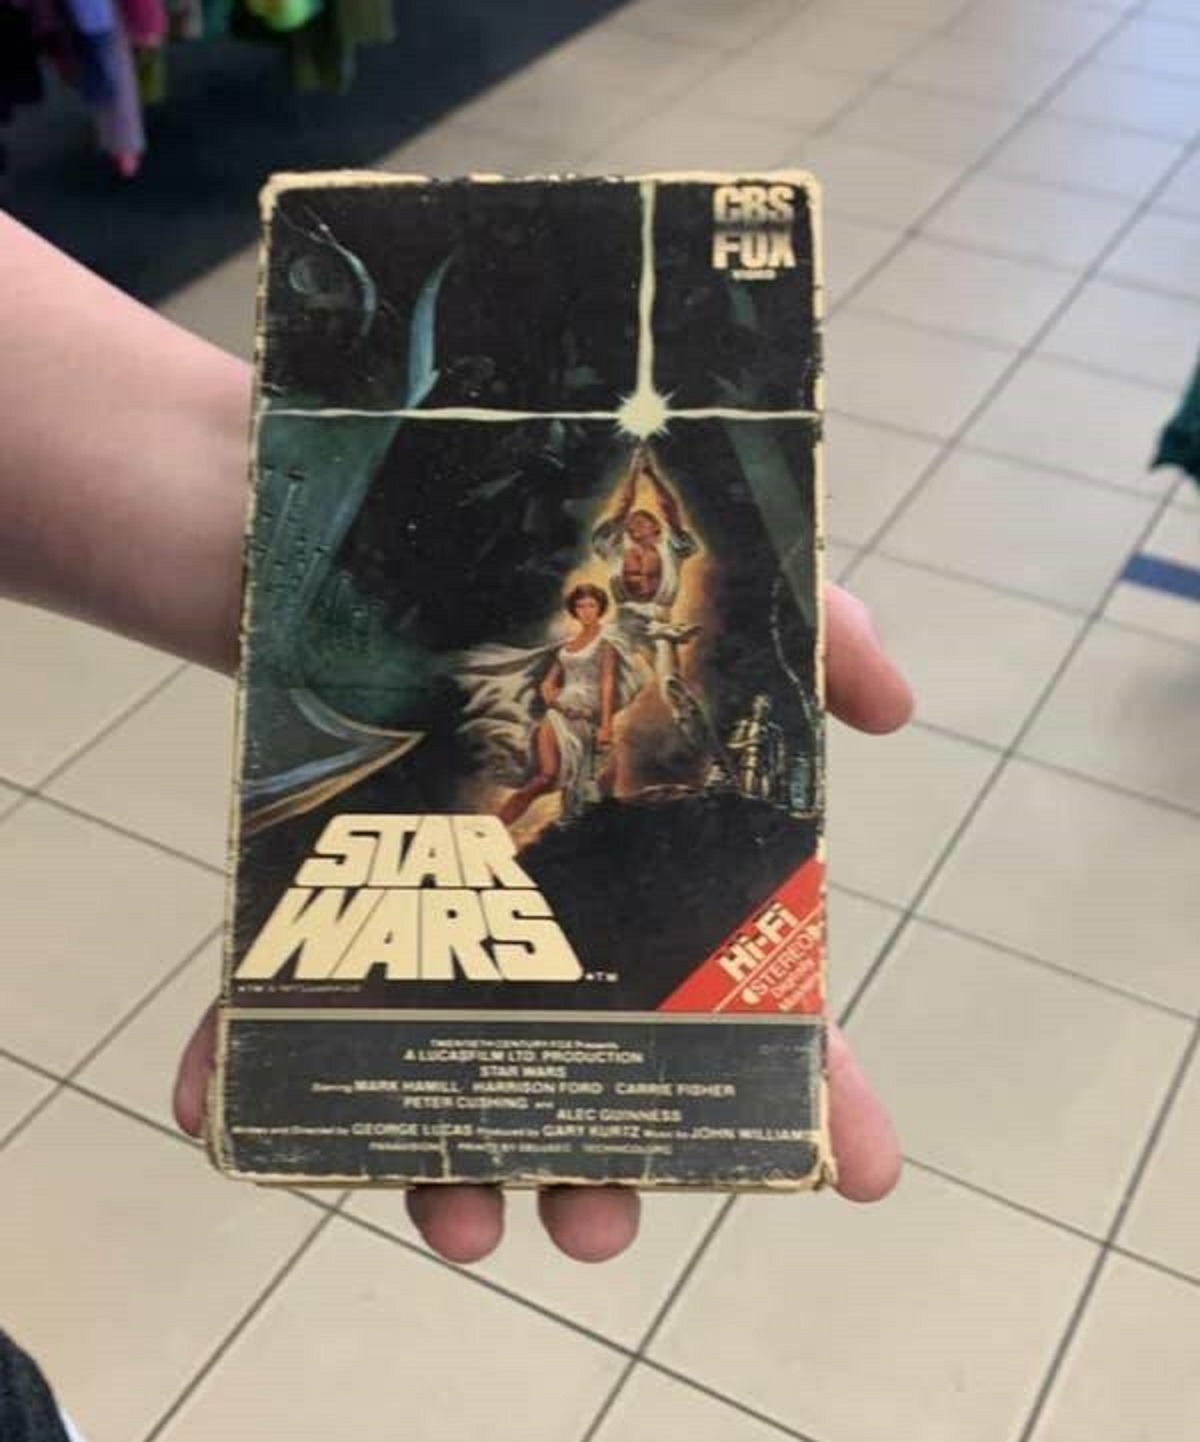 Here's one of the early editions of Star Wars: Episode IV — A New Hope, back when it wasn't part of a series and it was just called Star Wars.